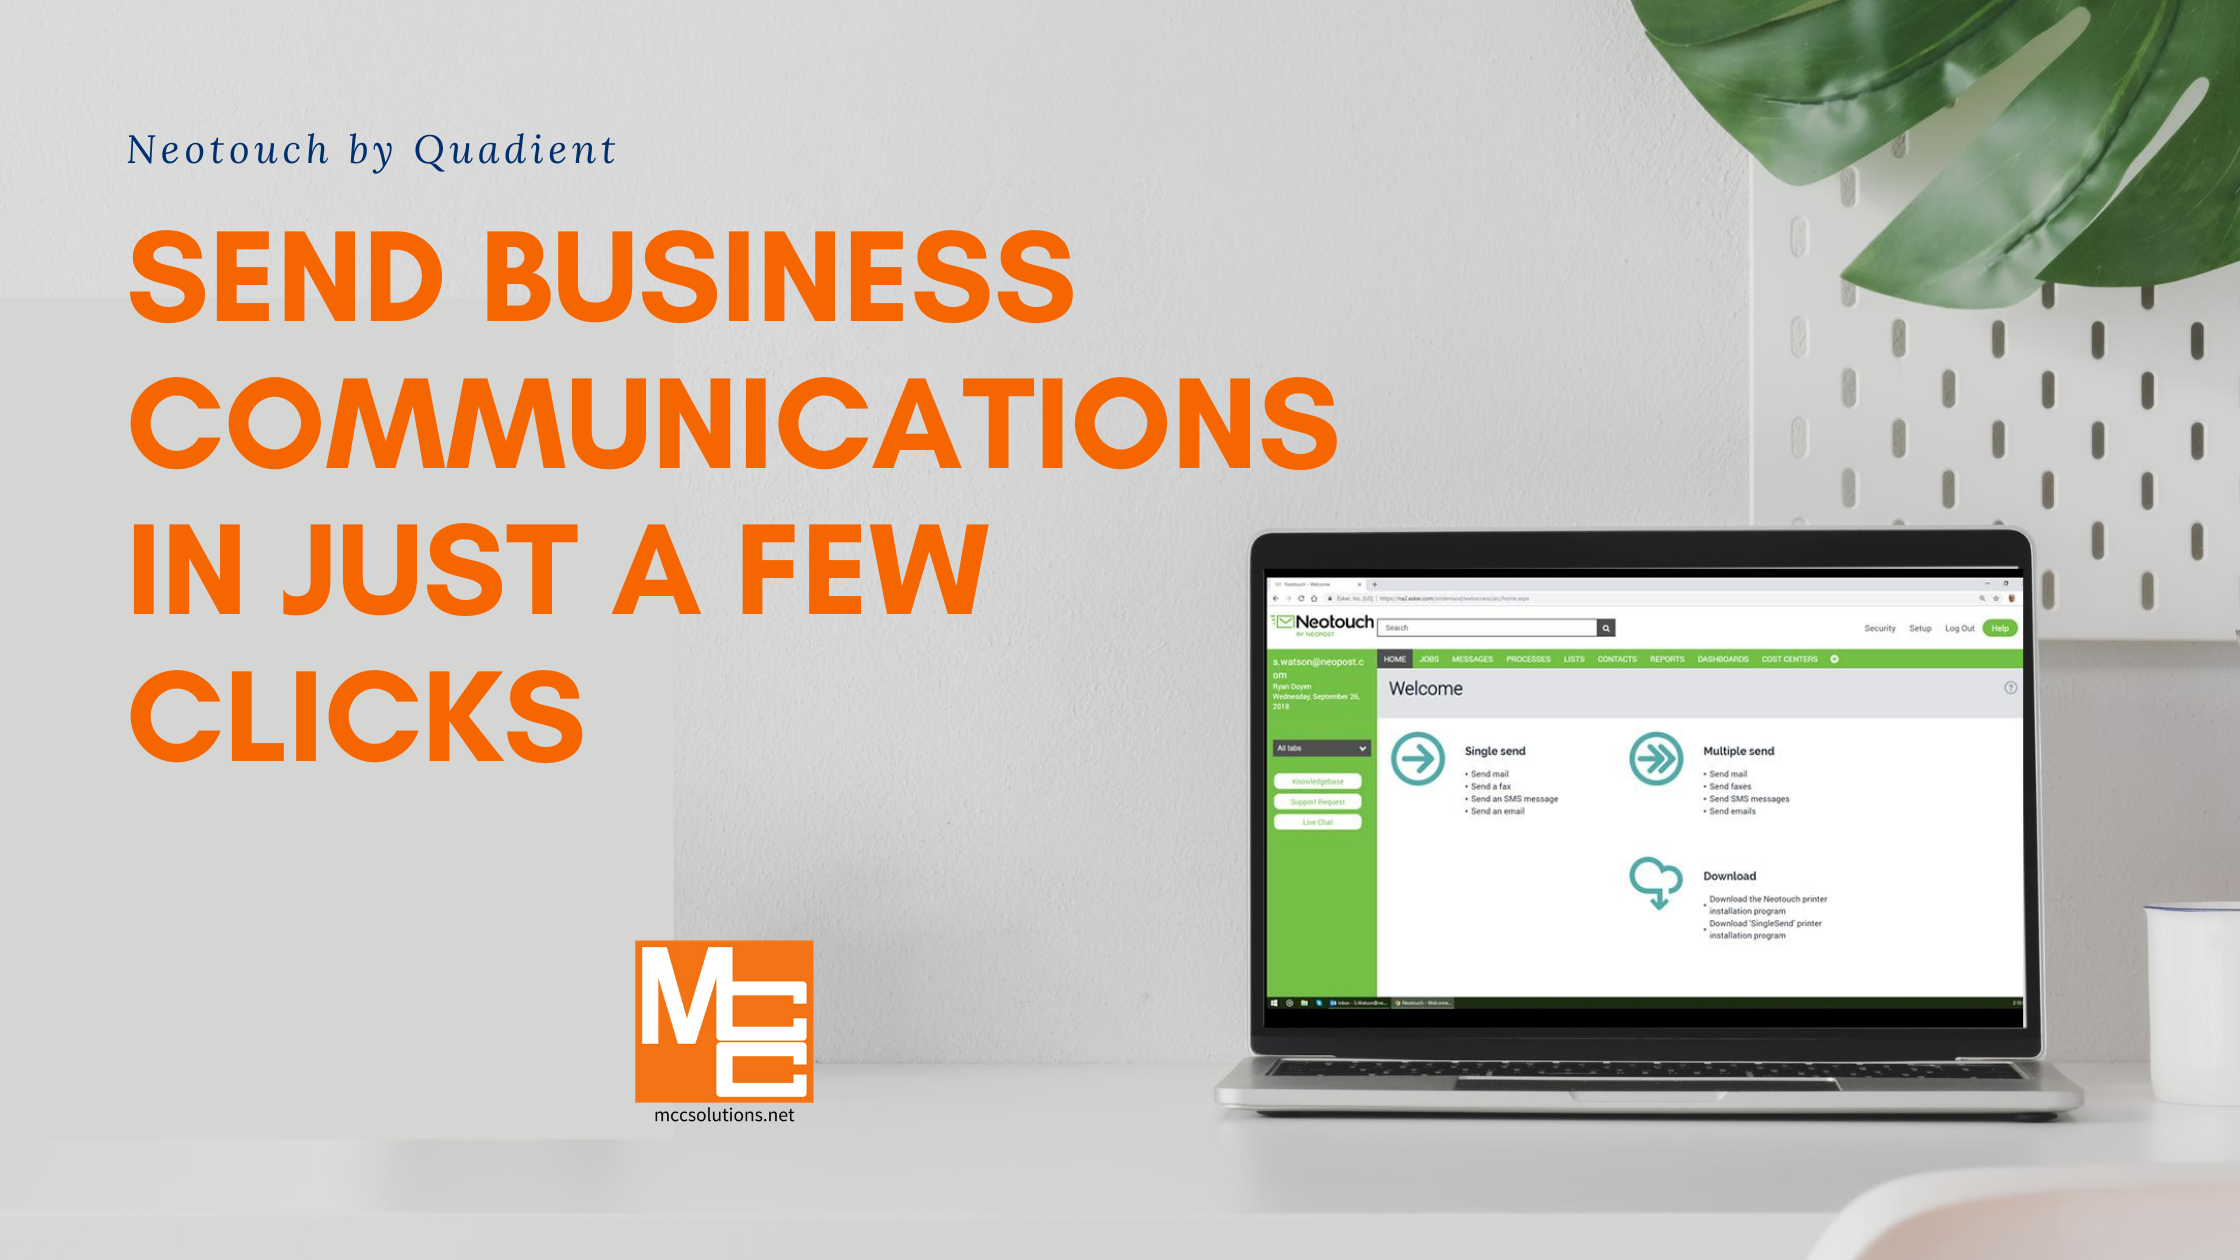 Send business communications in just a few clicks with Neotouch by Quadient and MCC